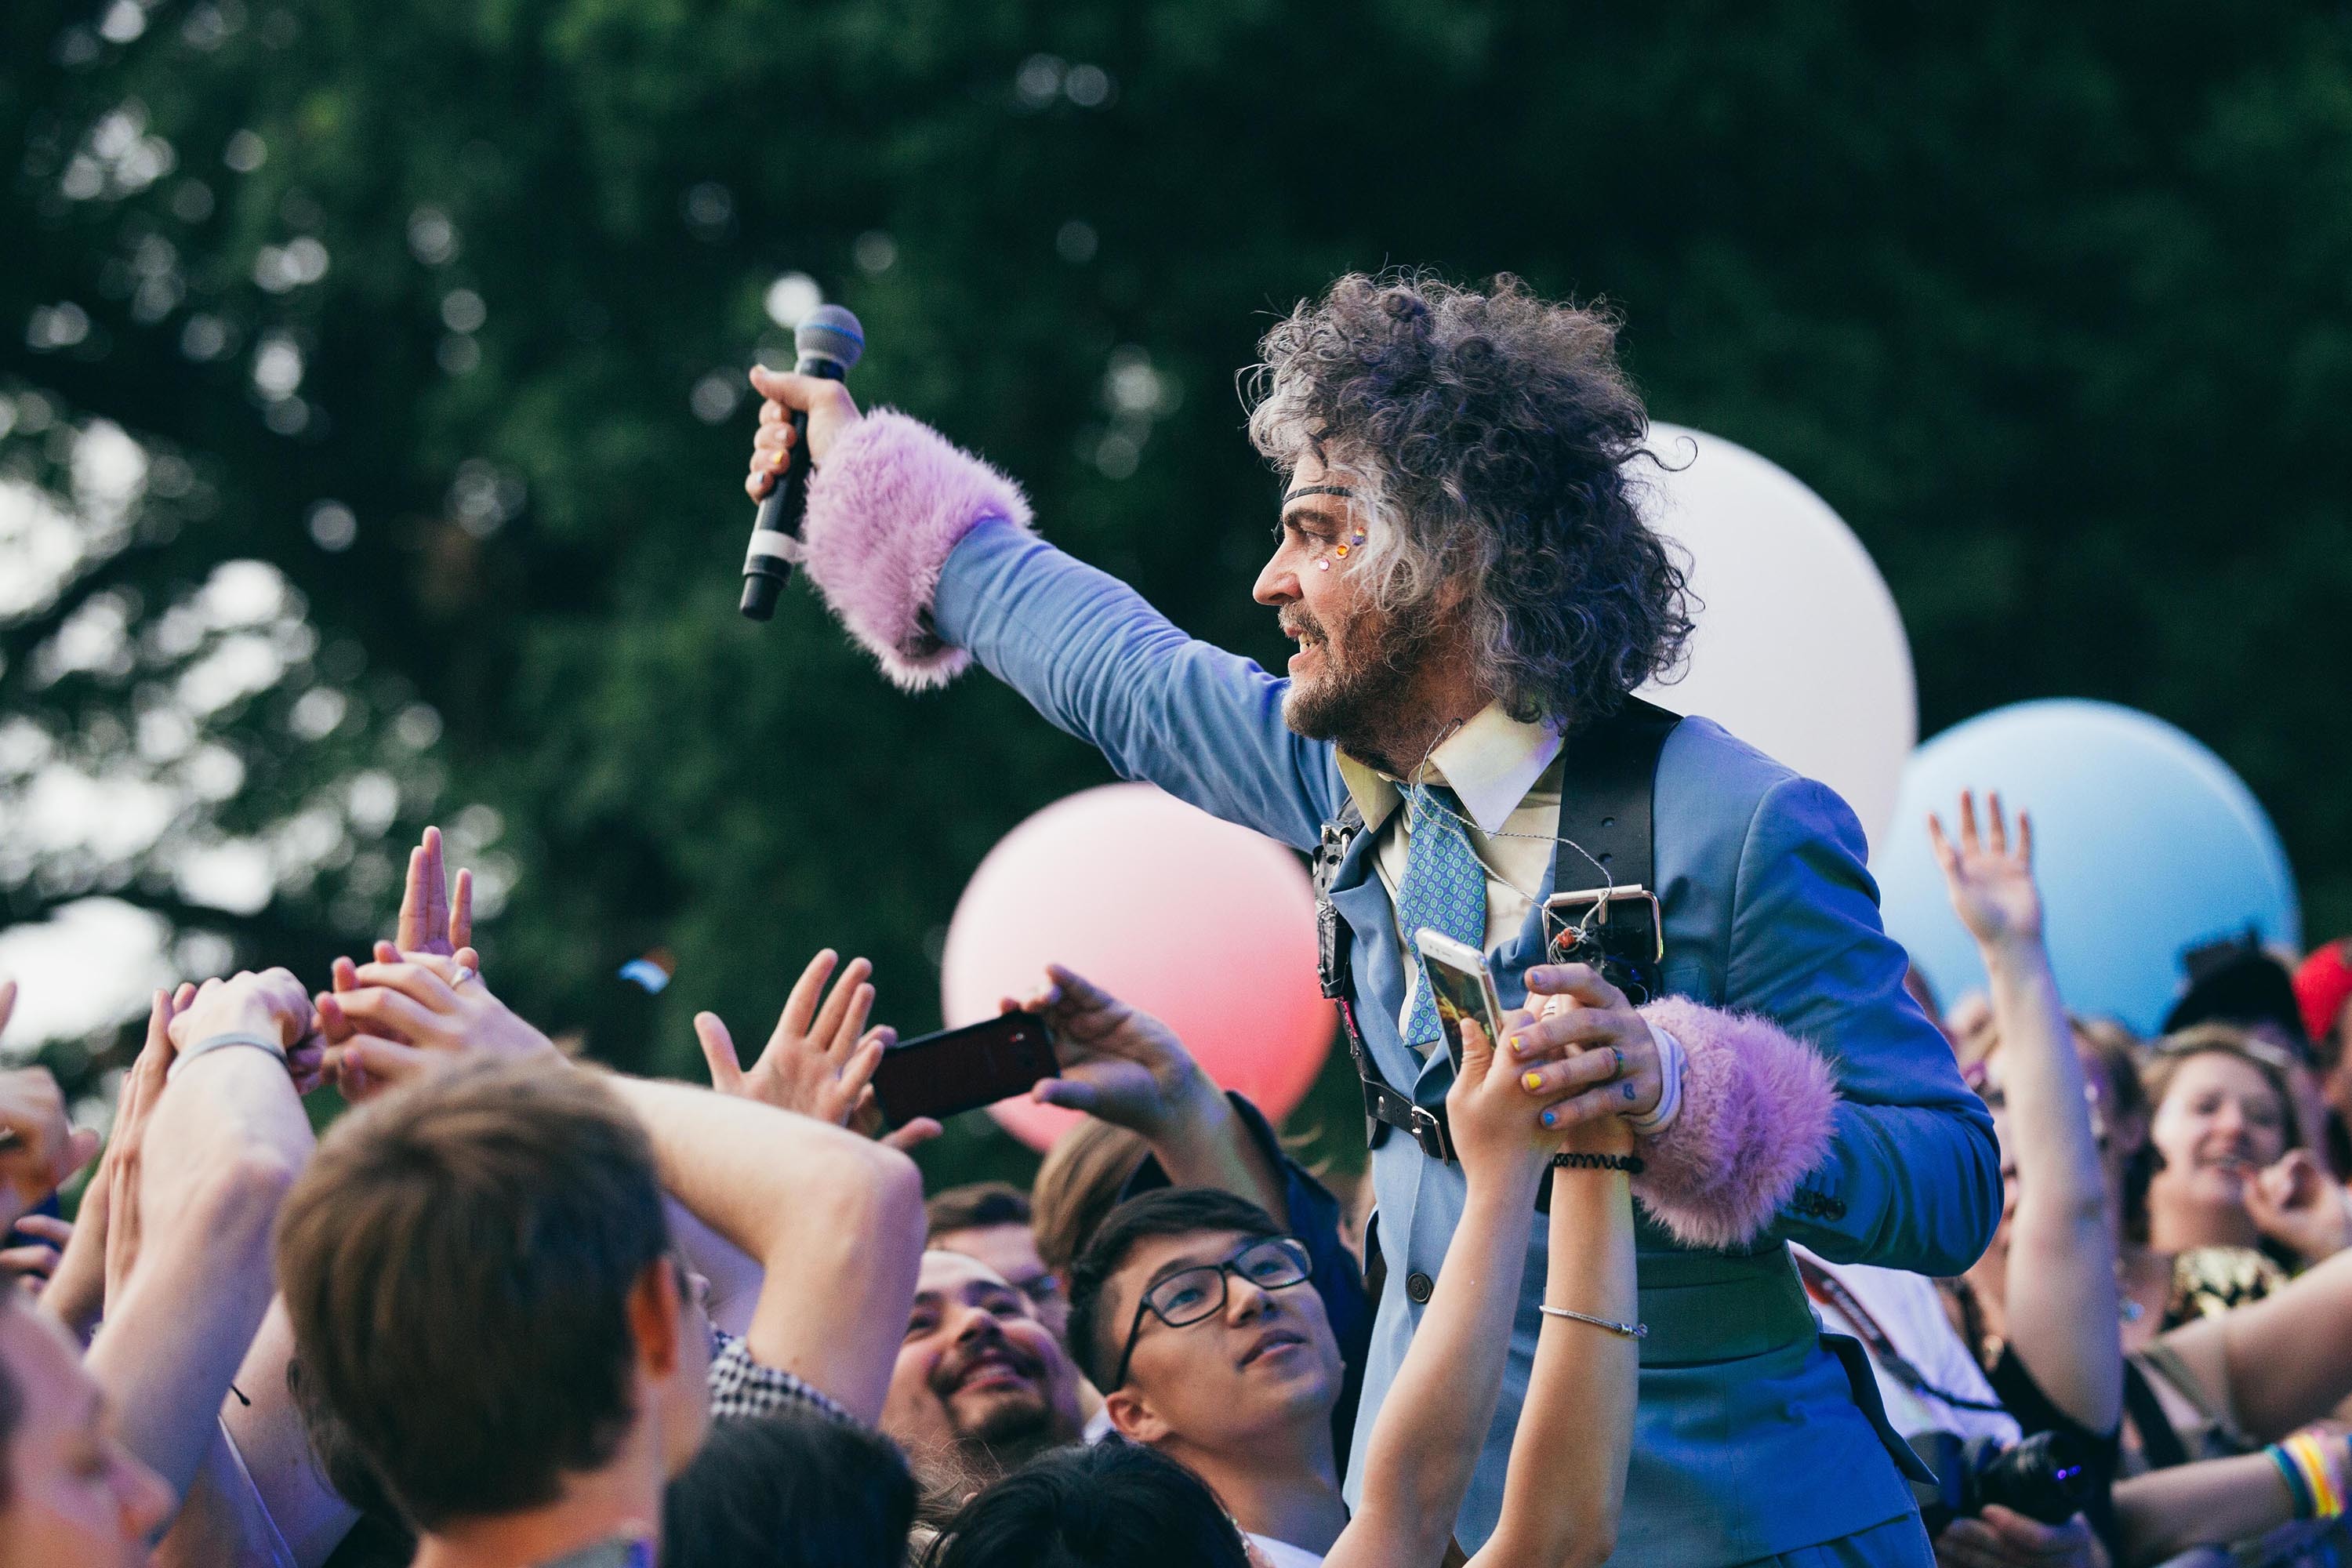 the flaming lips tour